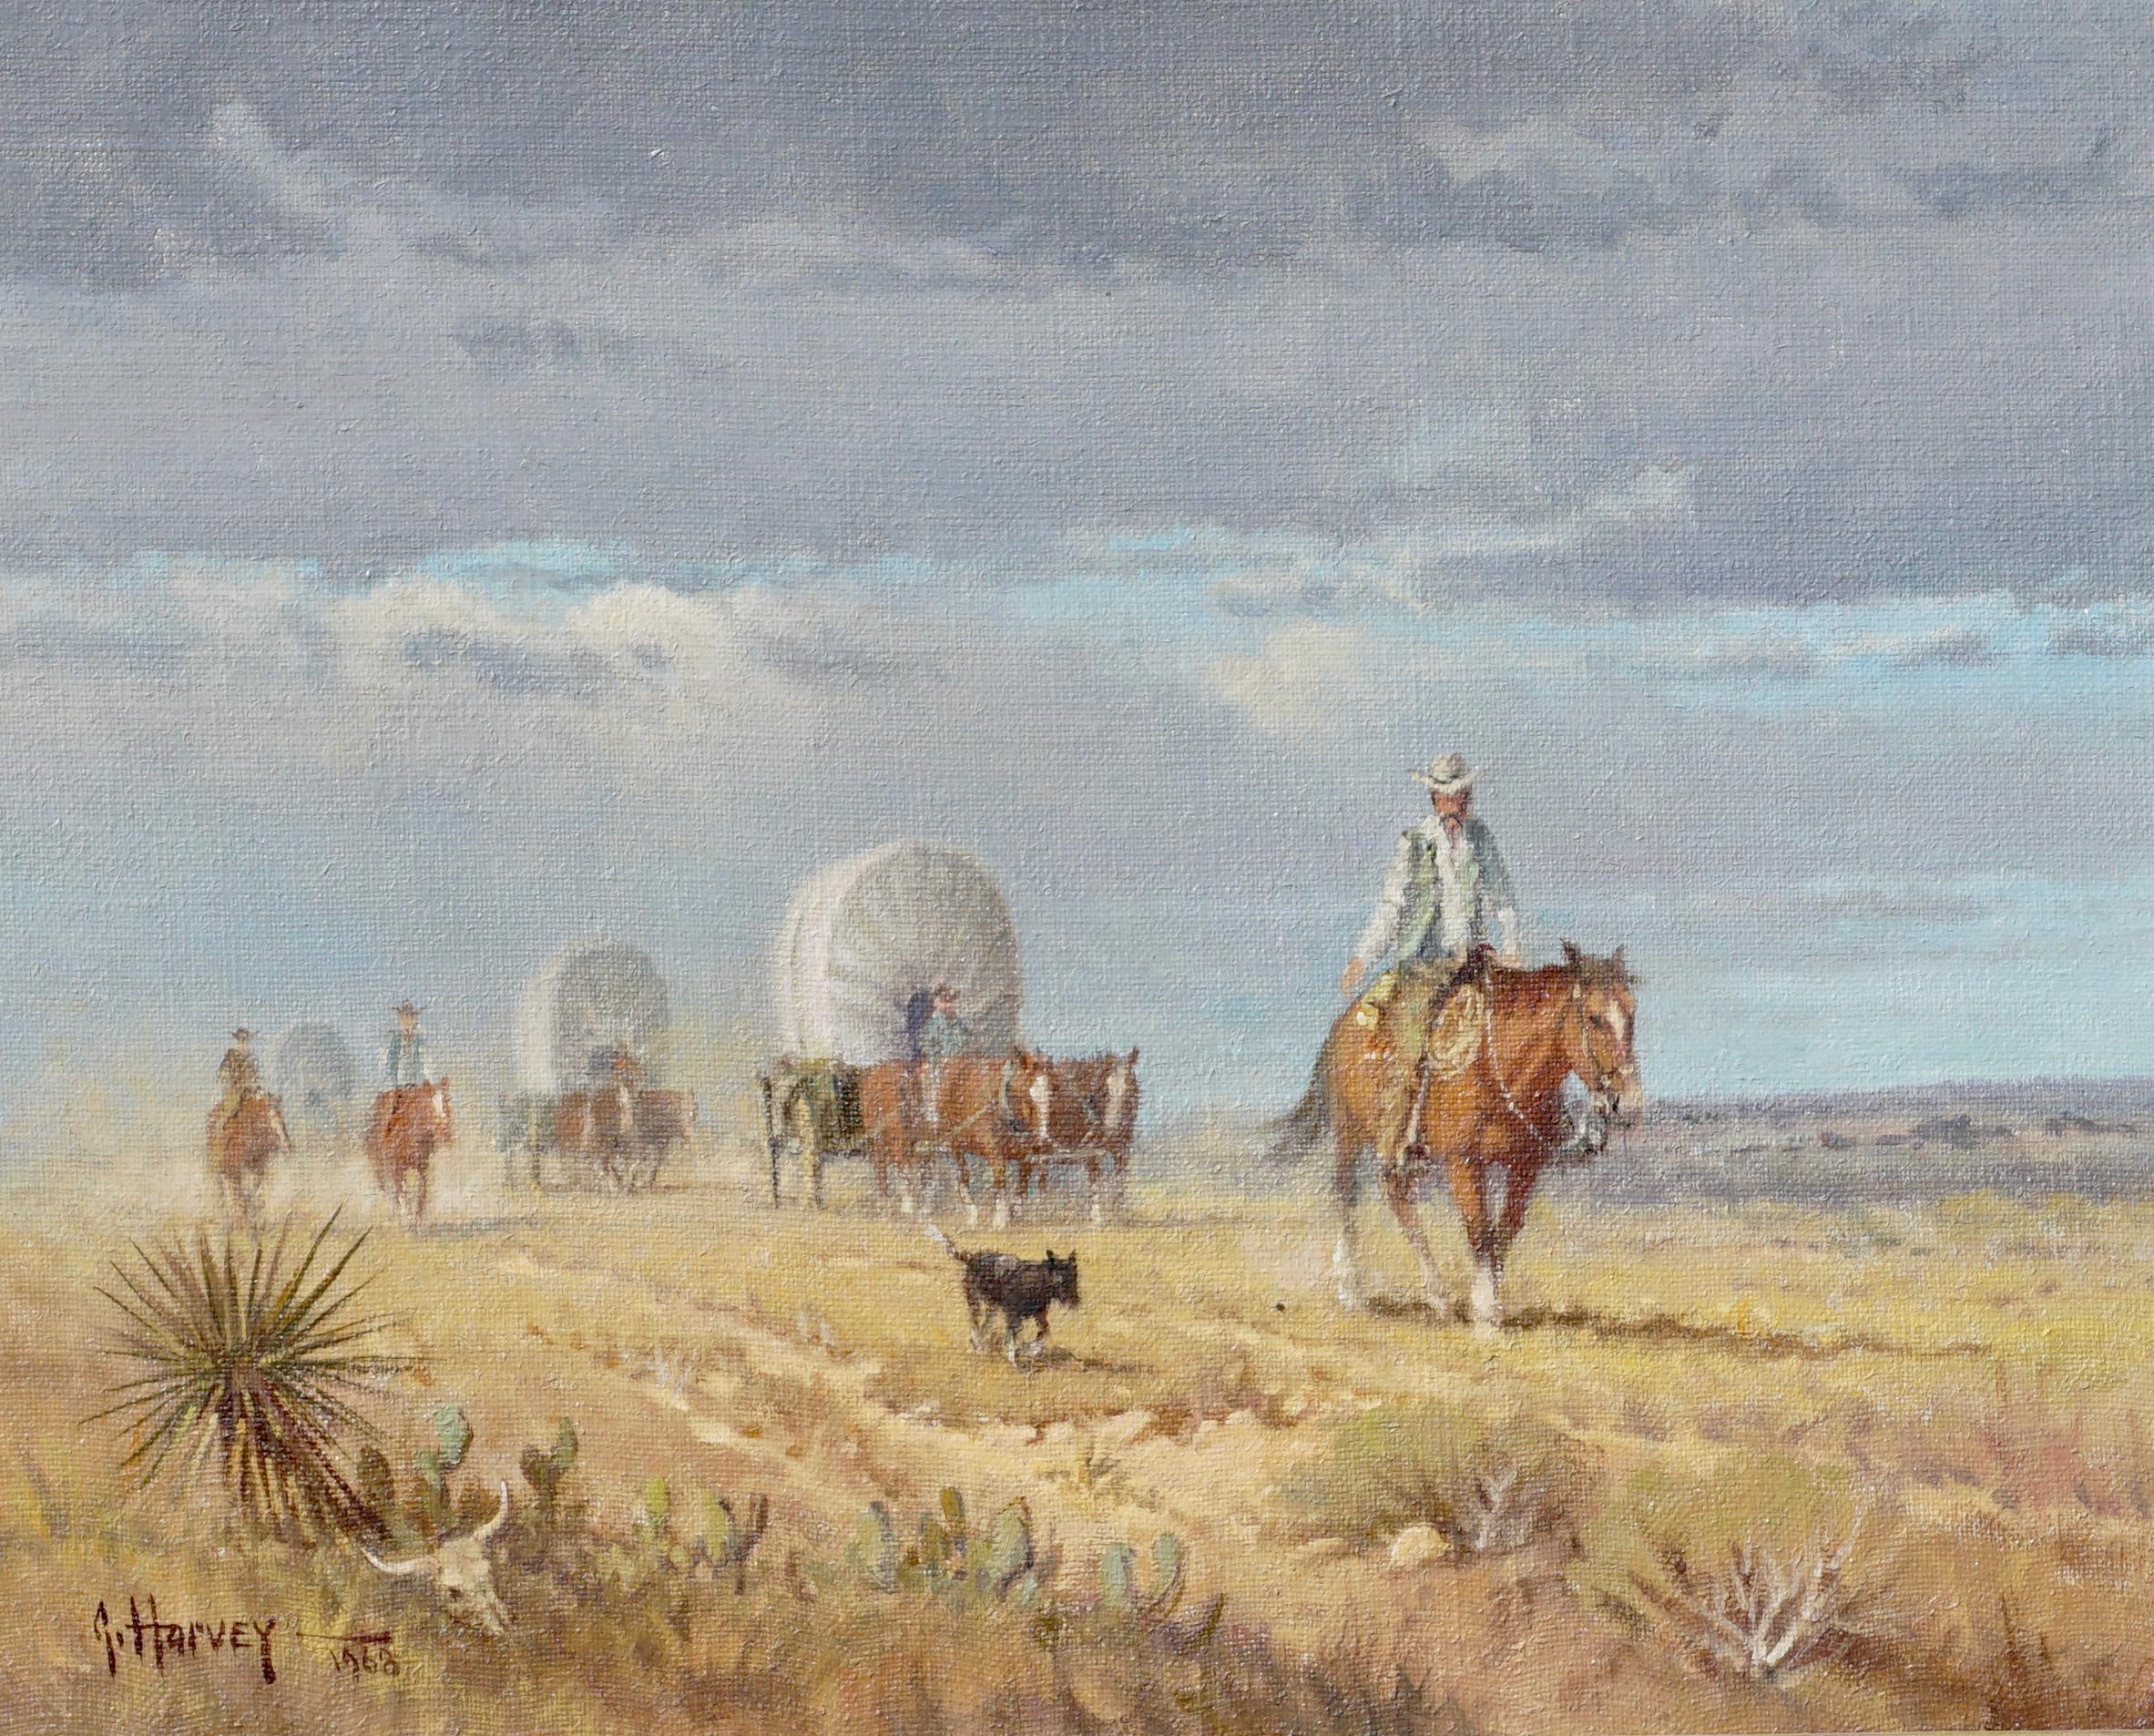 G. Harvey (Gerald Harvey Jones) (1933-2017) “Crossing The Texas Plains”

Everything you could want in a G. Harvey painting! This western painting depicts a crossing of cowboys riding horses alongside wagons kicking up dust among the cactus and